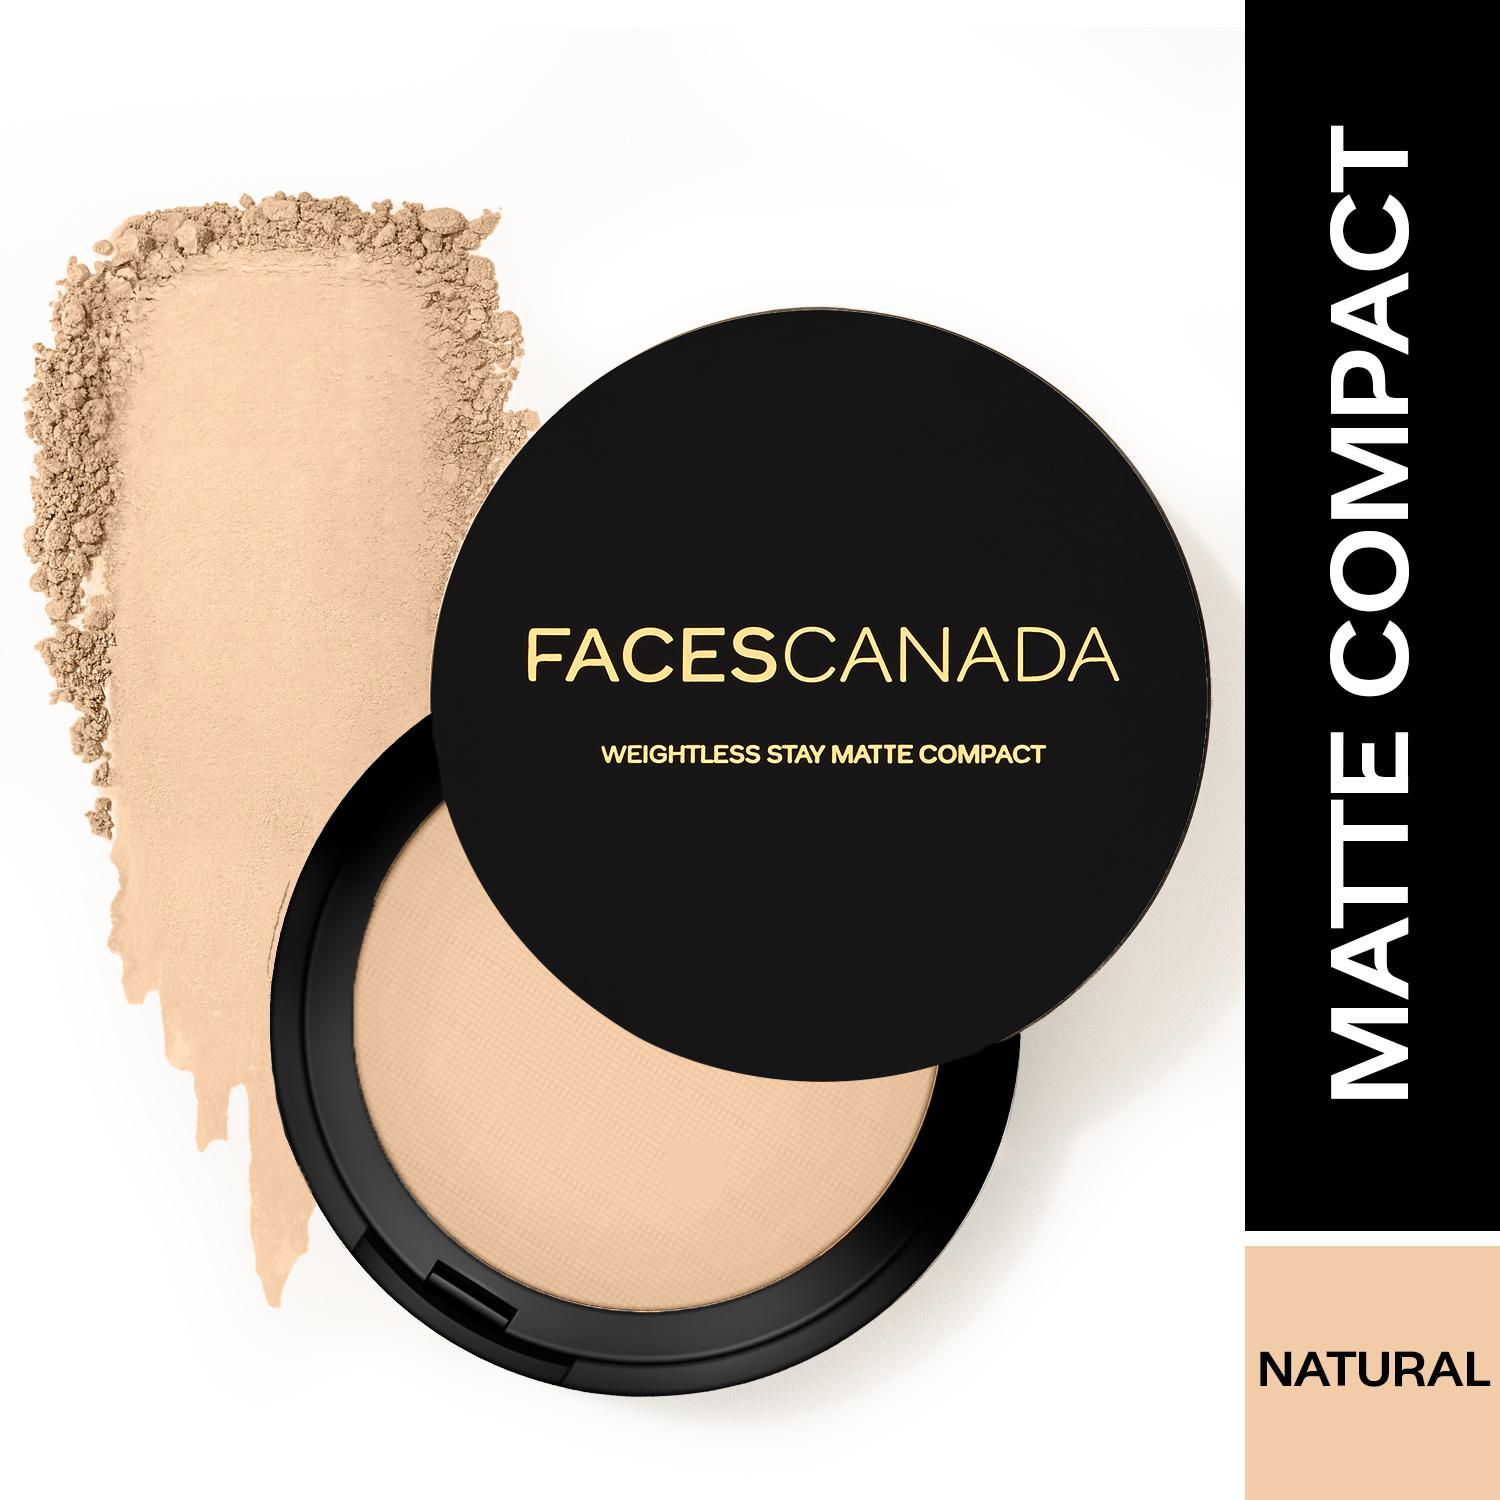 Faces Canada Weightless Stay Matte Finish Compact Powder,Non Oily Matte Pressed Powder -Natural (9 g)